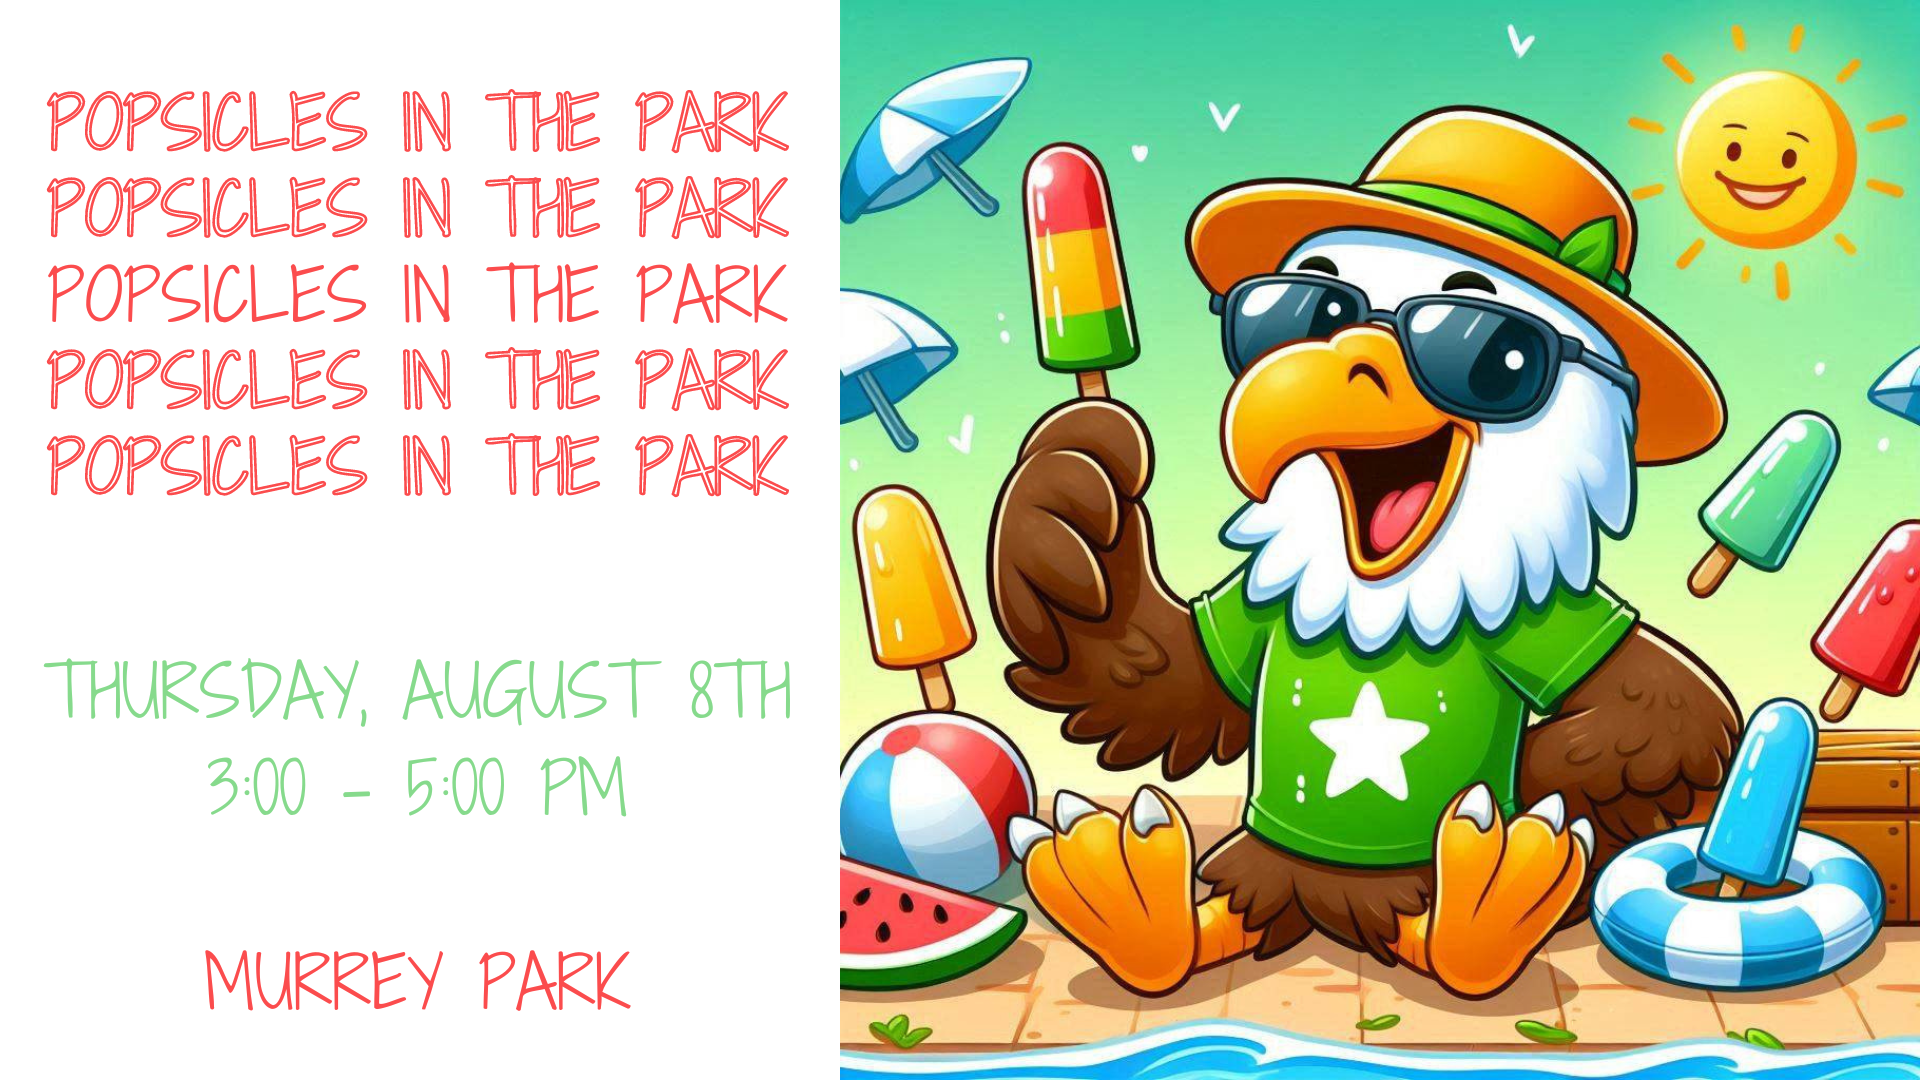 Popsicles in the Park  Thursday, August 8th 3:00-5:00 PM Murrey Park